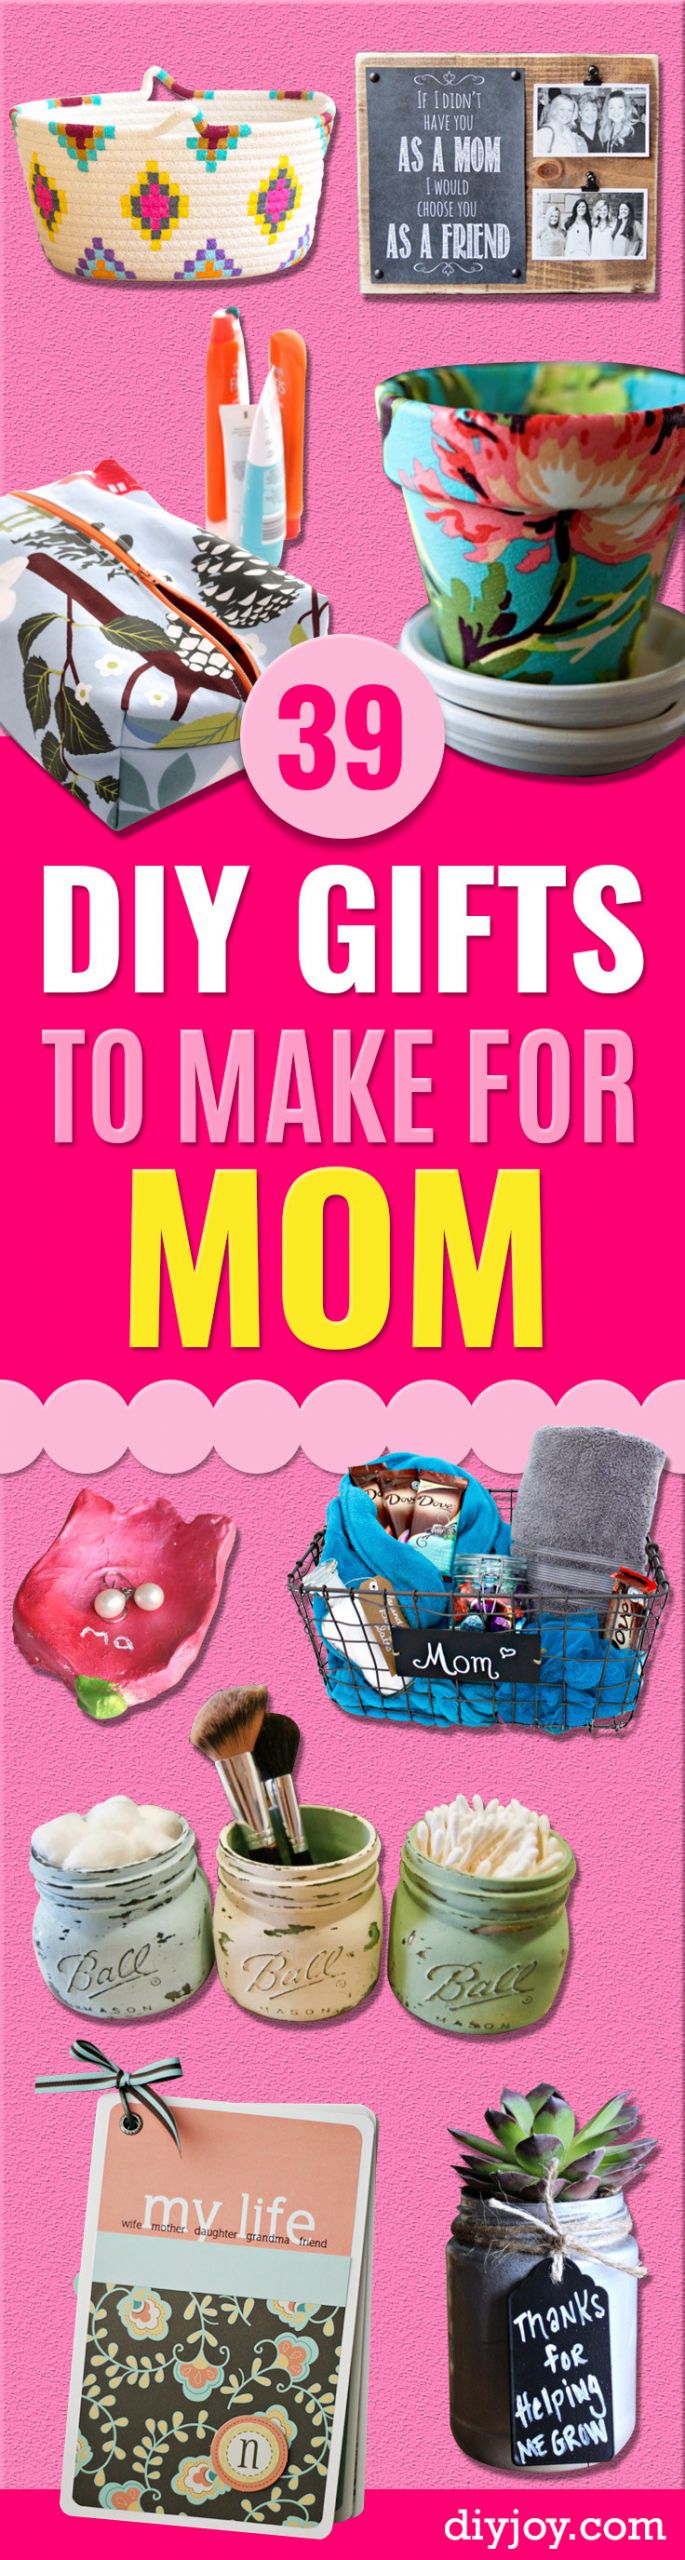 DIY Mothers Birthday Gifts
 39 Creative DIY Gifts to Make for Mom